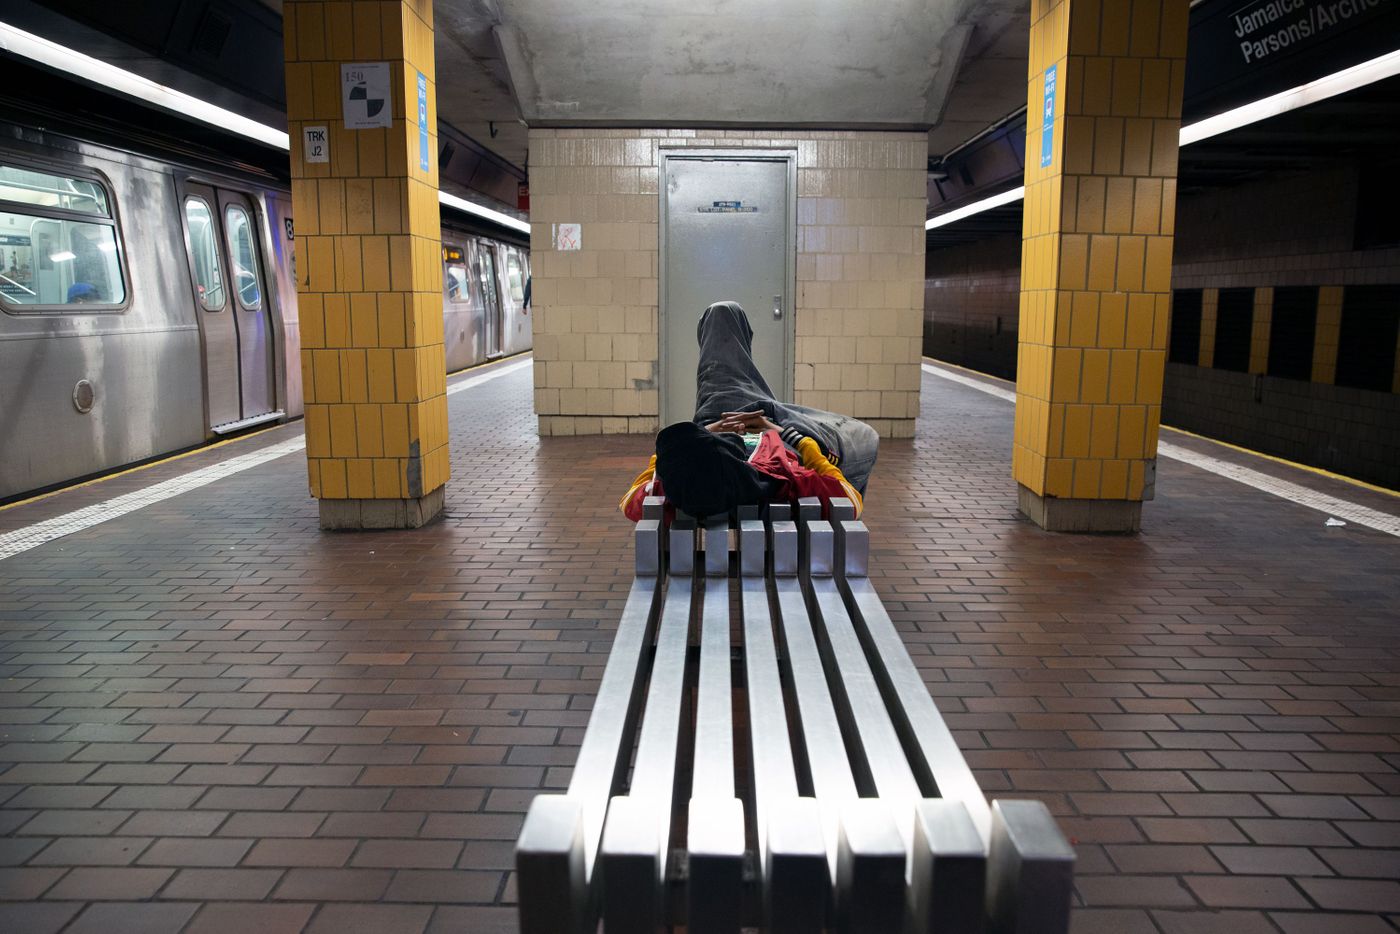 A person sleeps at the Jamaica Center station, Oct. 2, 2019.